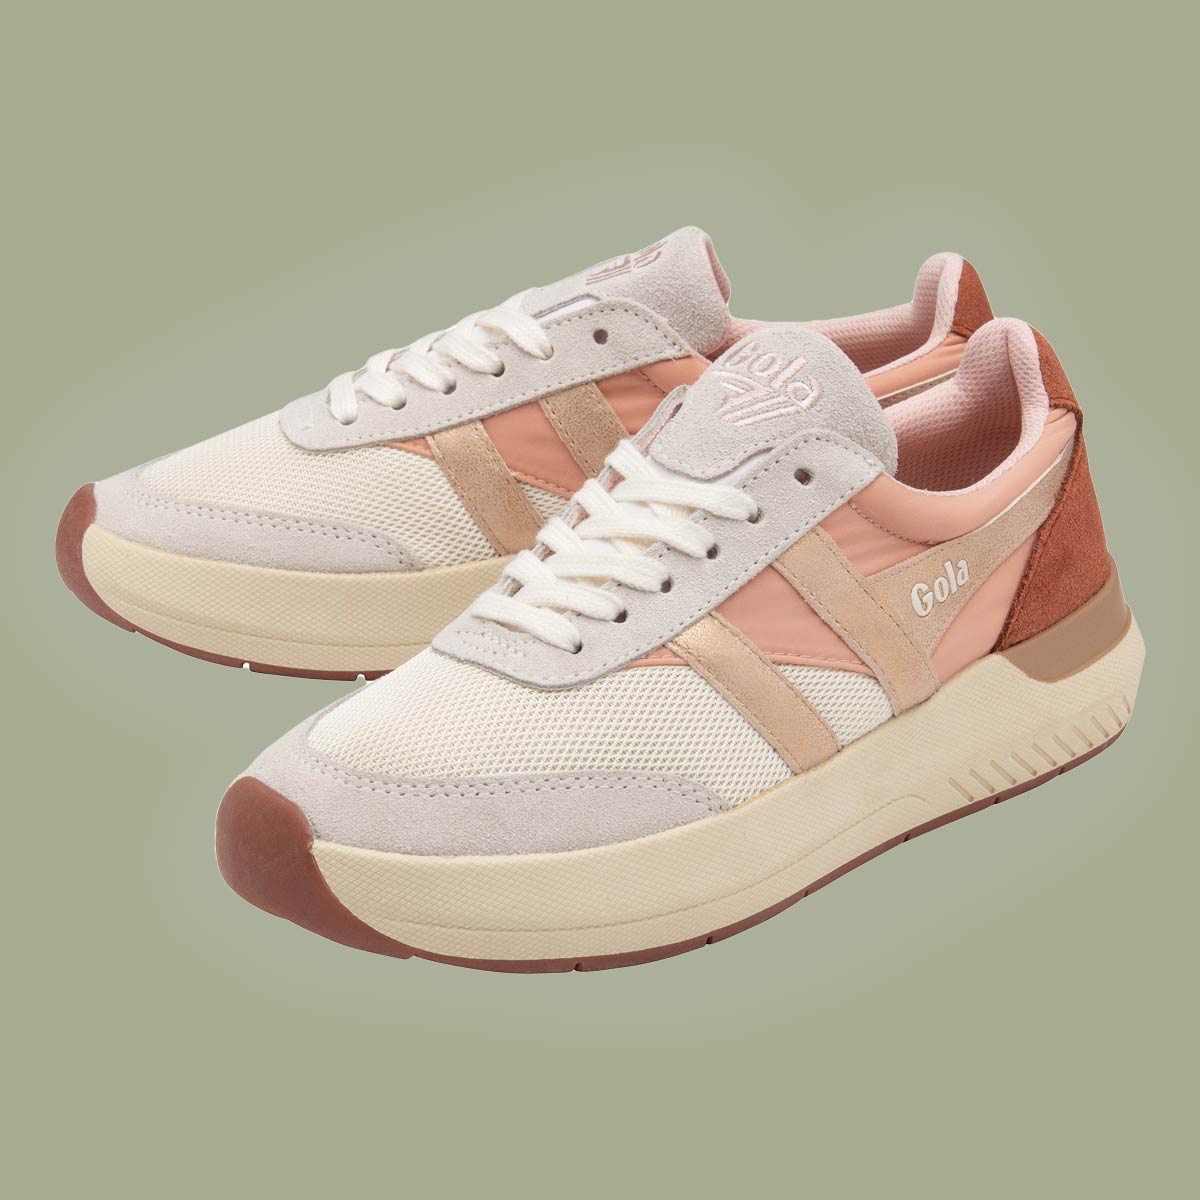 Sneaker Raven Mirror Off Wht Pearl Pink Rose Gold GOLA 2